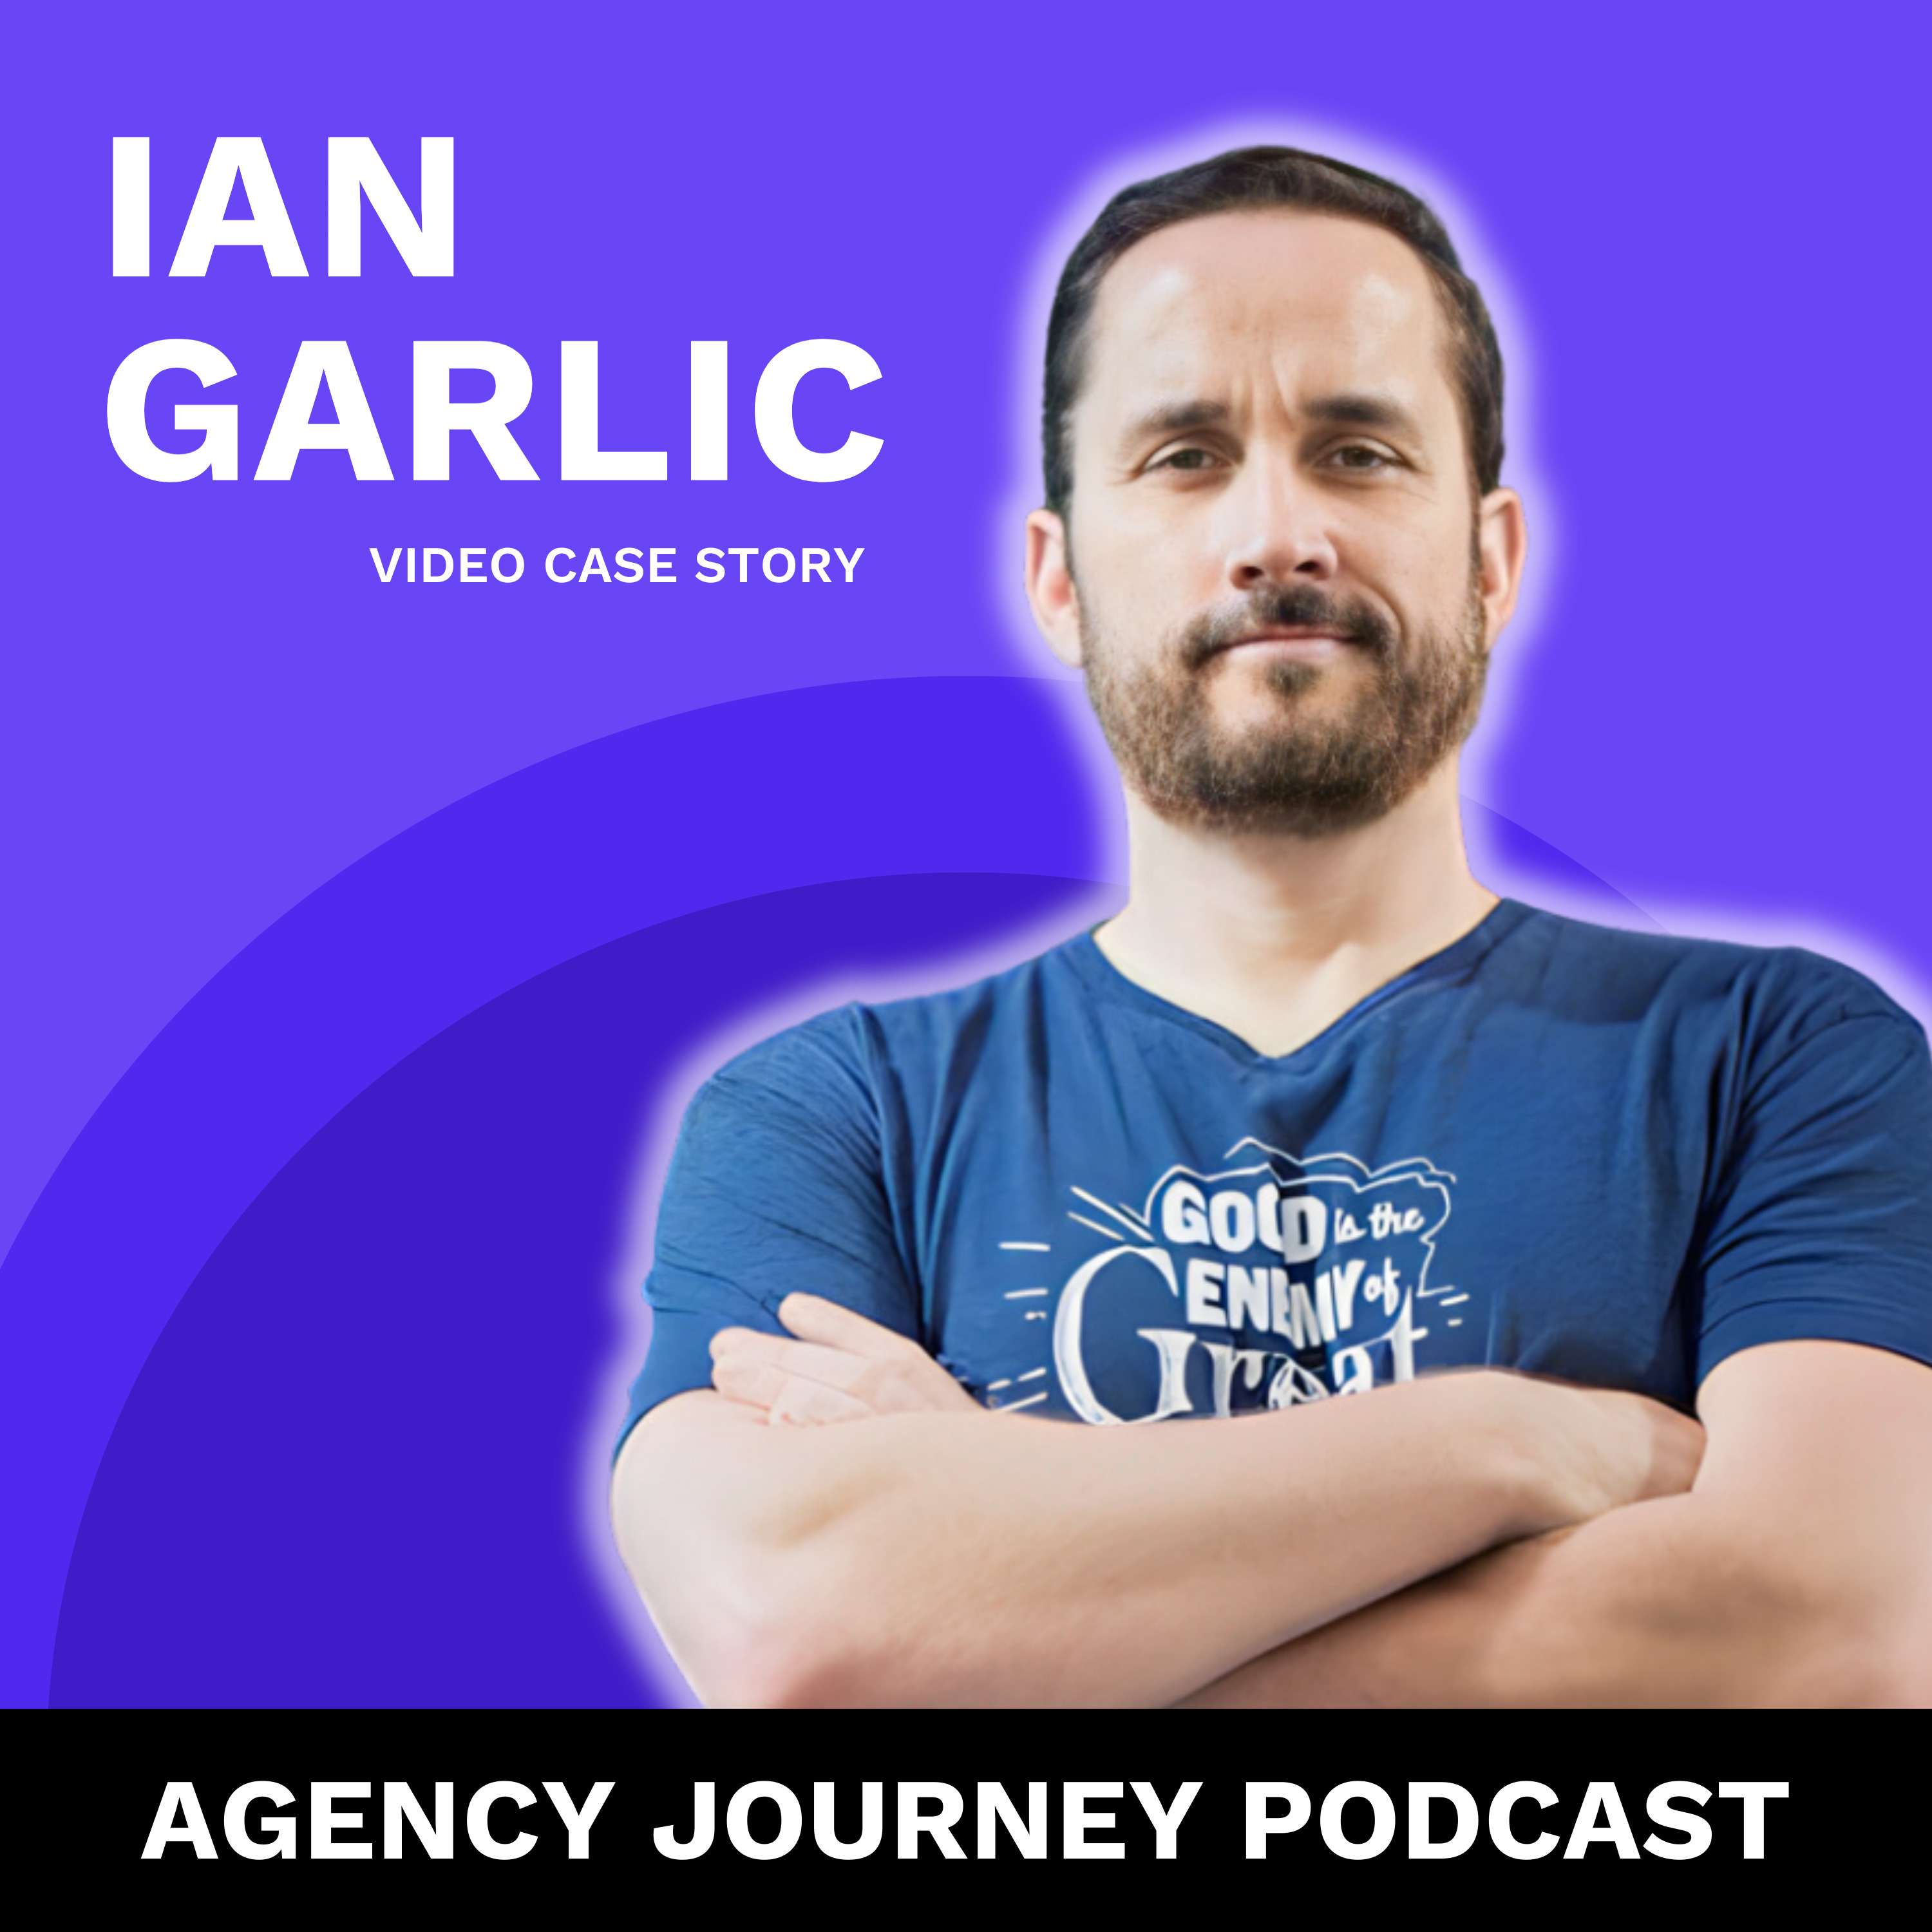 Video Case Studies, Writing a Business Book, and Running a Partnership Program with Ian Garlic